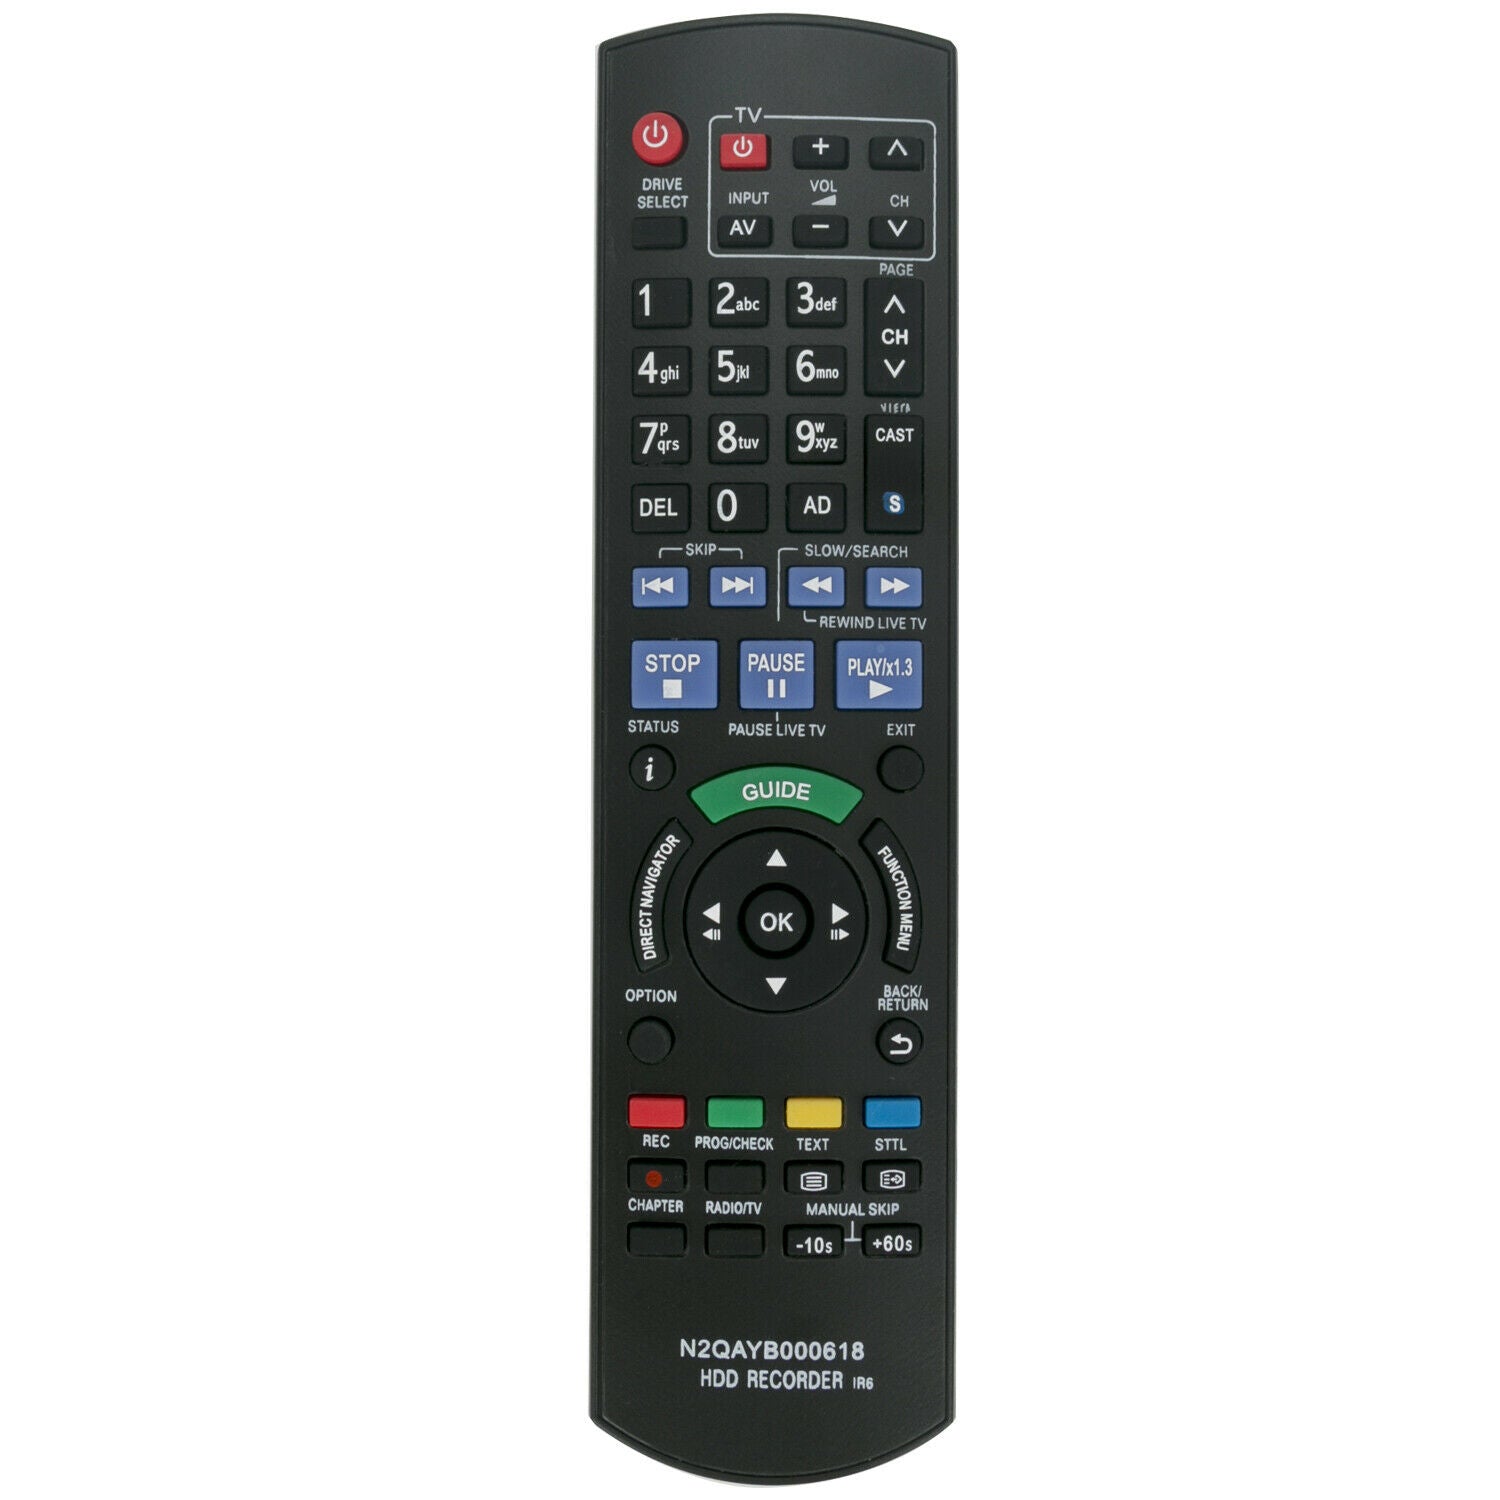 N2QAYB000618 Replacement Remote control for Panasonic DMR-HW100 DMRHW100EB-K